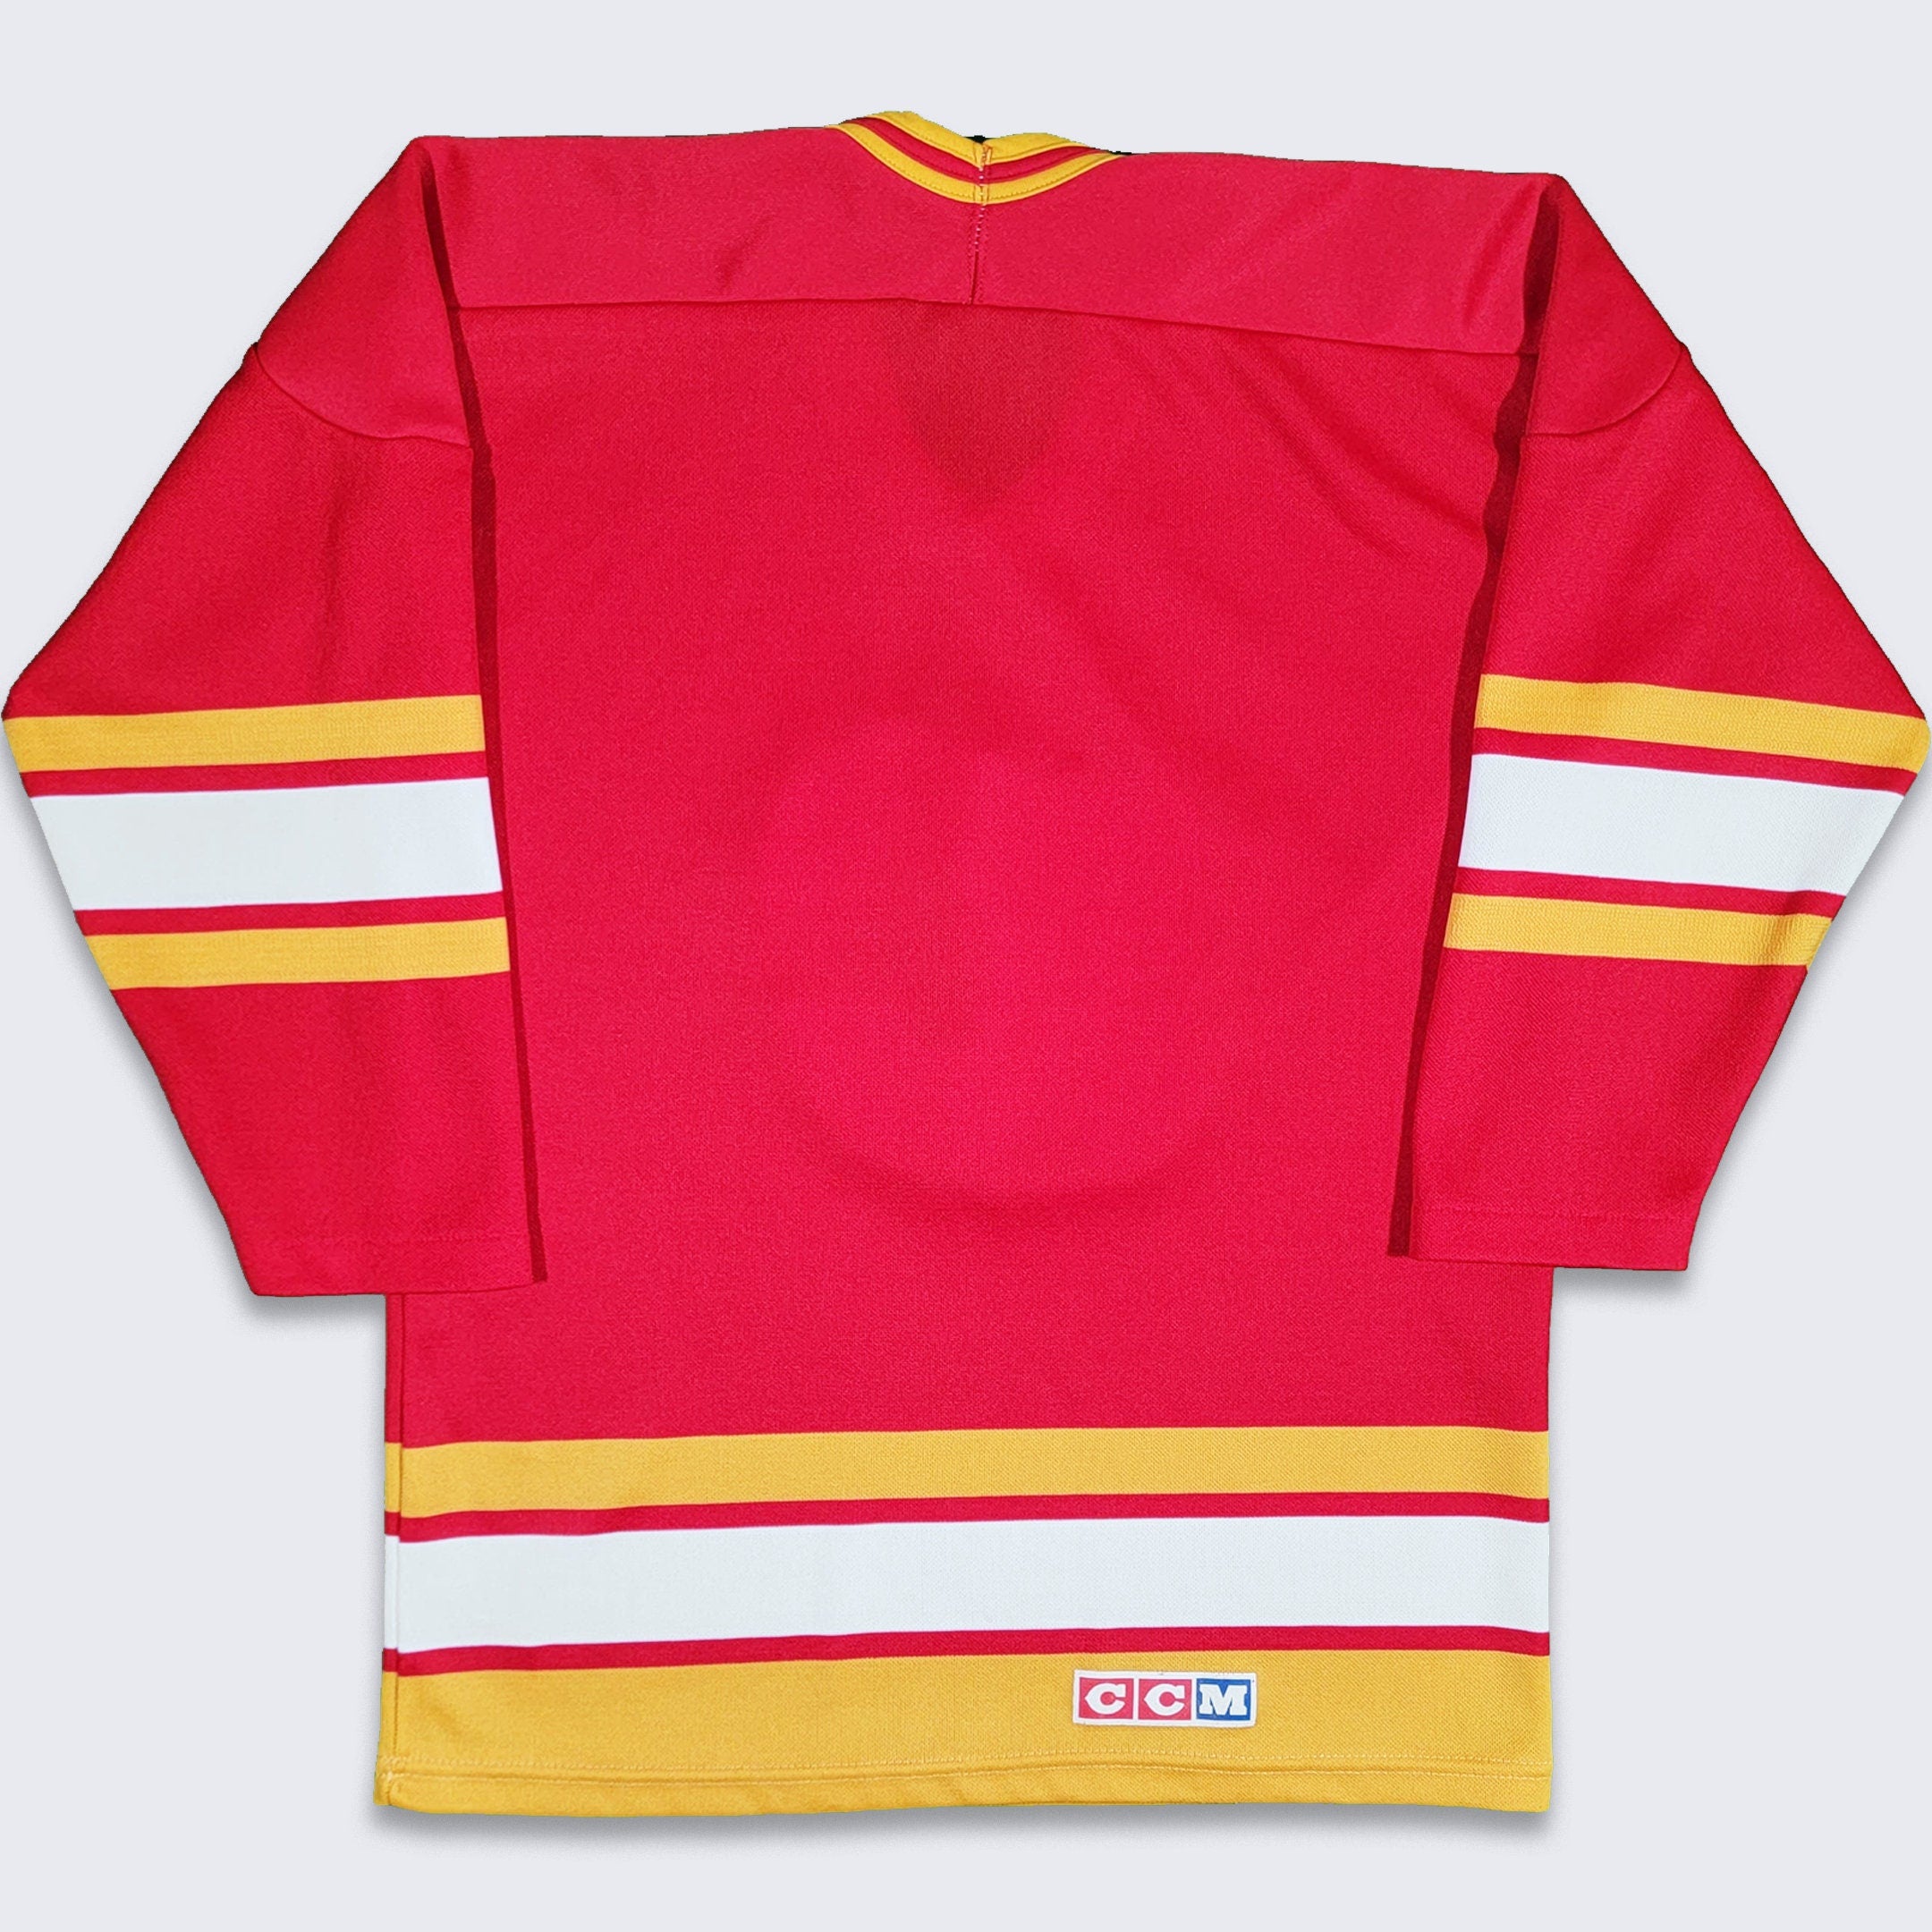 Calgary Flames Vintage 80s Ccm Youth Hockey Jersey - Size Youth